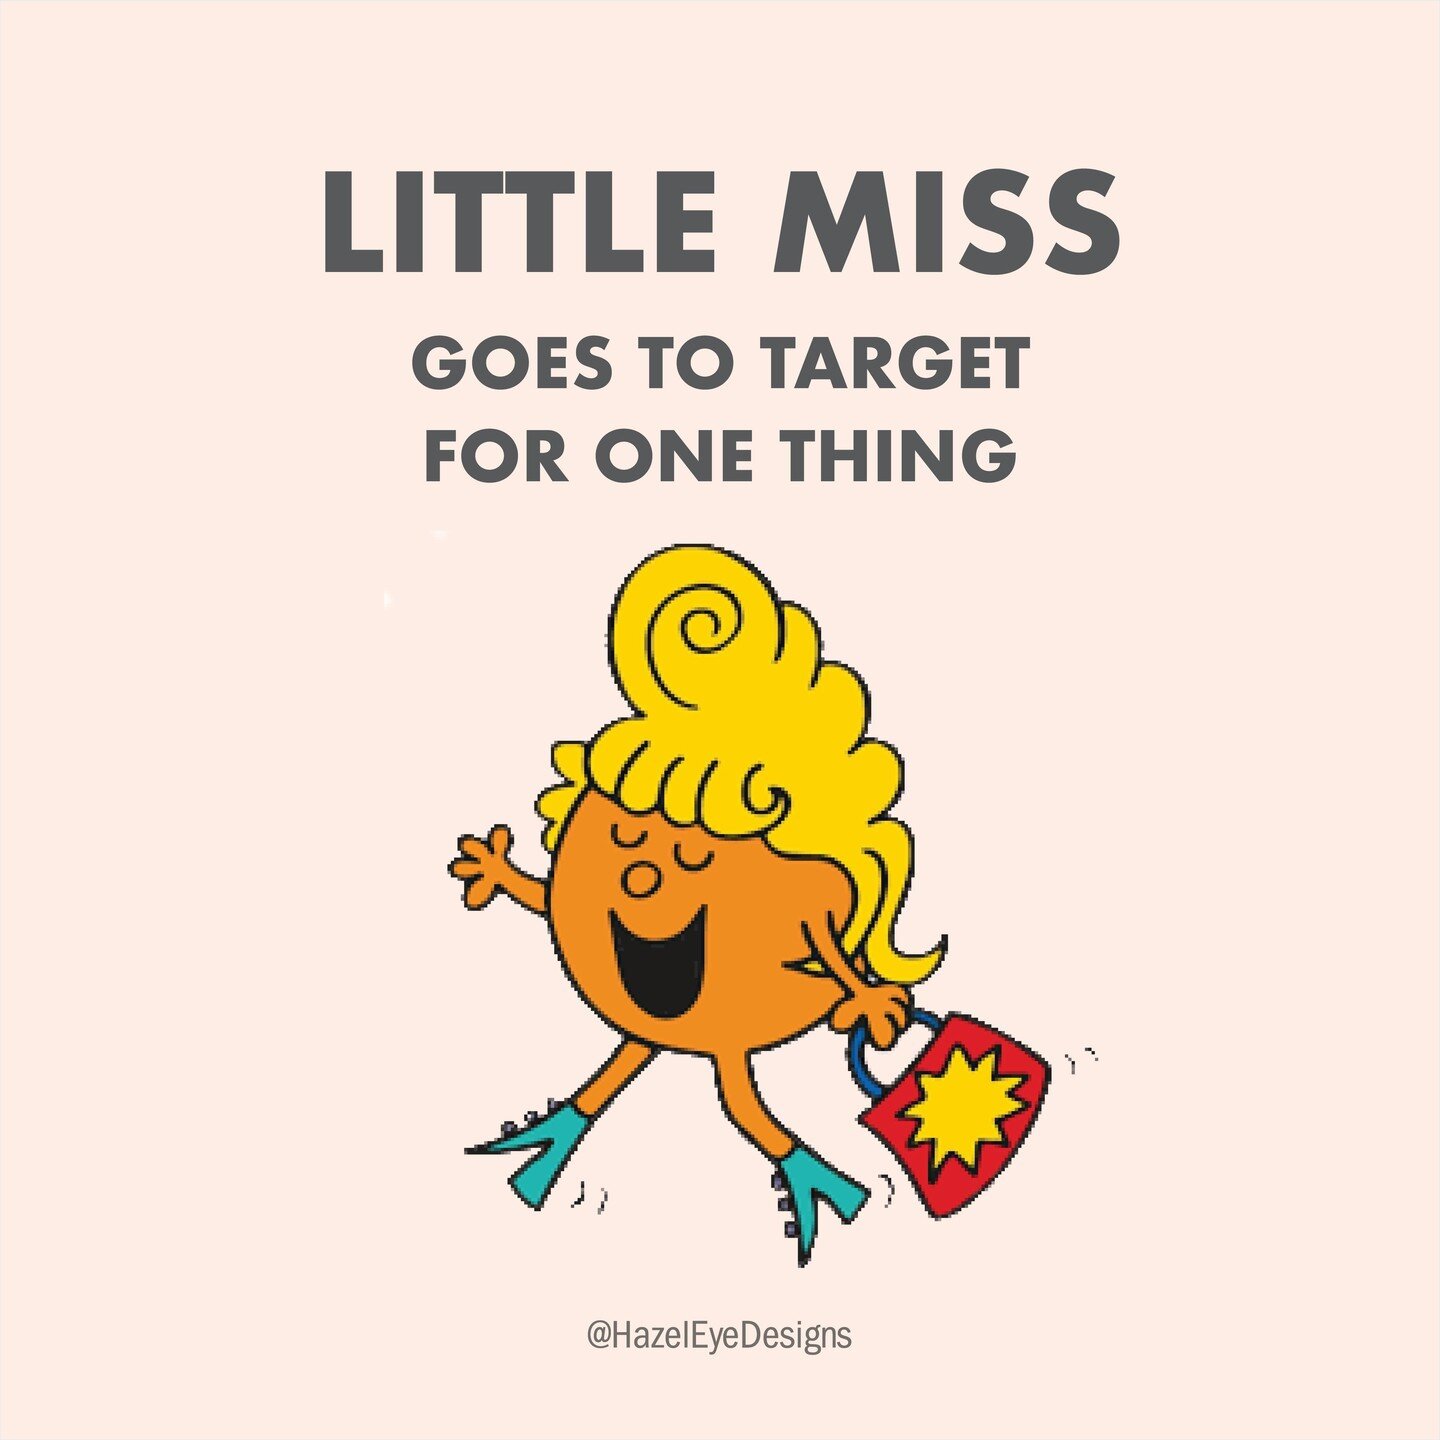 I'm not one to jump on the meme train, but this has literally been me this entire summer since we moved into our new home 😂 Honestly, though - can anyone go to Target for just one thing?! Not sure it's possible.⁣
⁣
Happy Monday!⁣
⁣
#littlemiss #targ